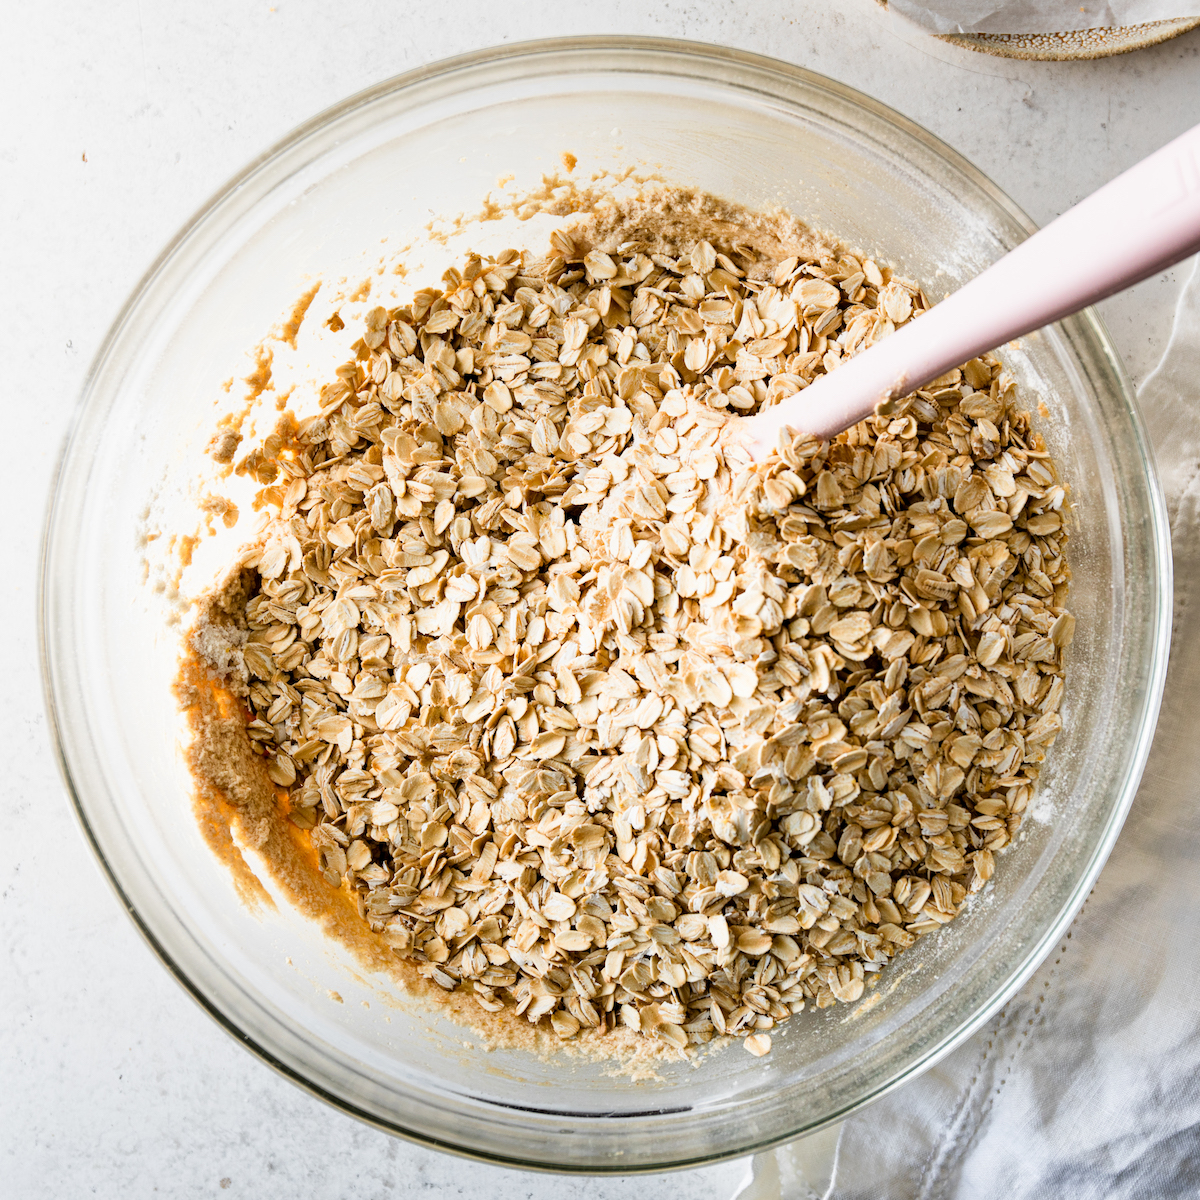 Oatmeal in a glass bowl.